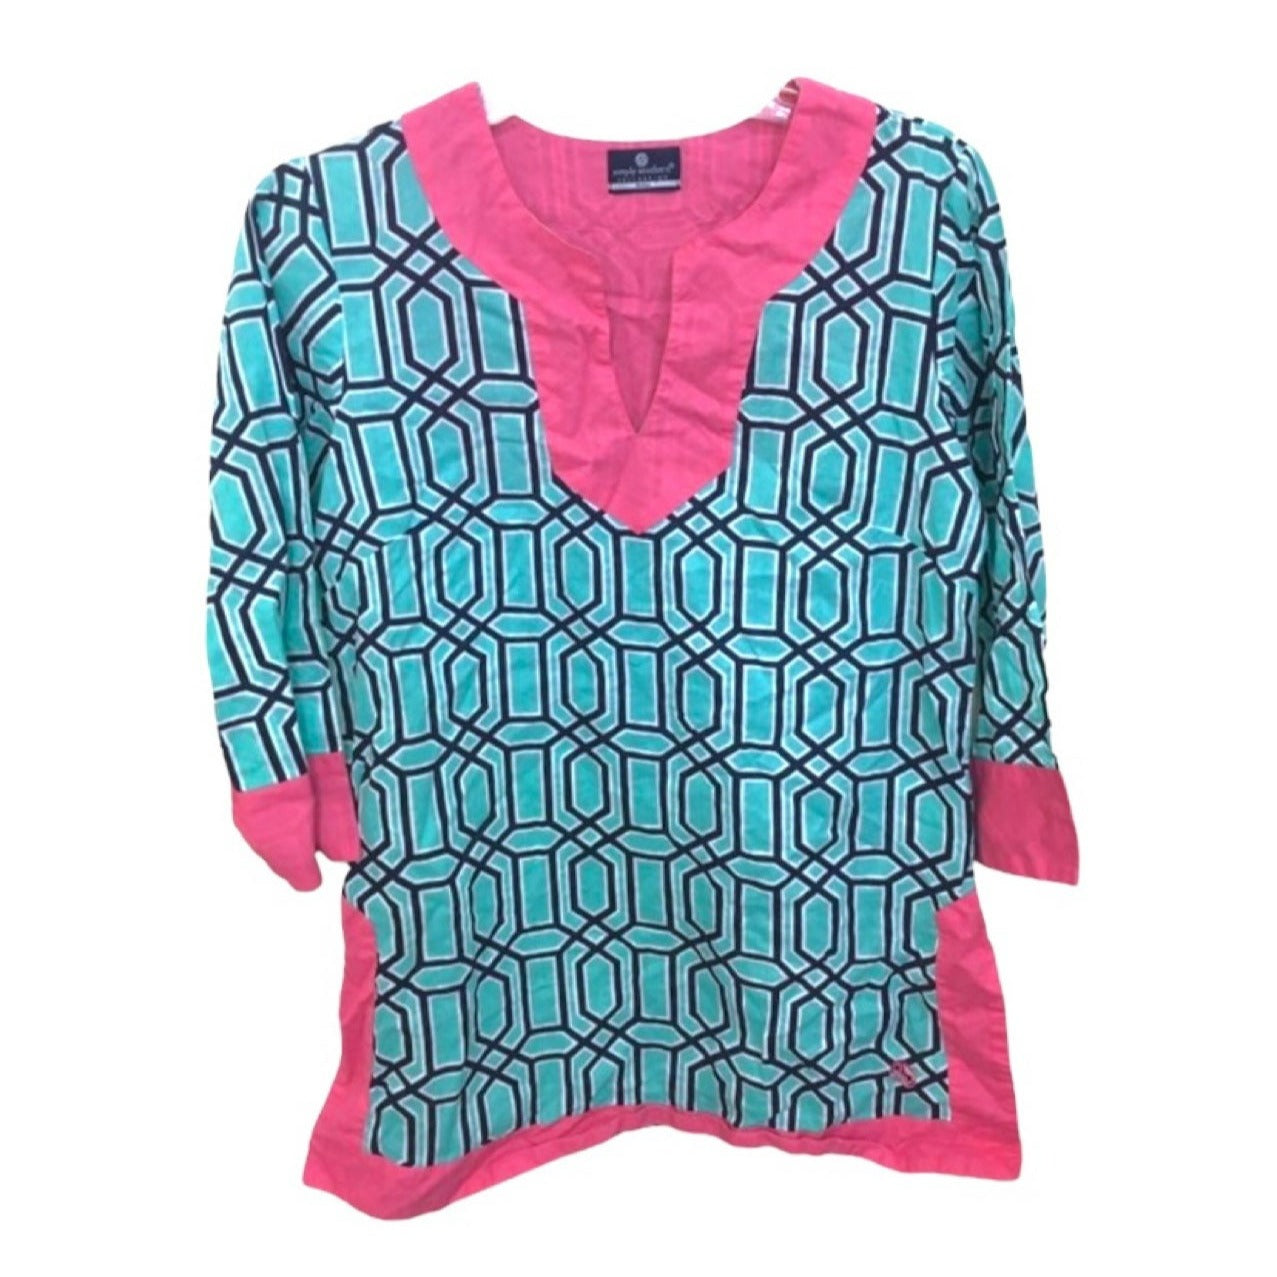 Small Simply Southern Tunic or swim cover up